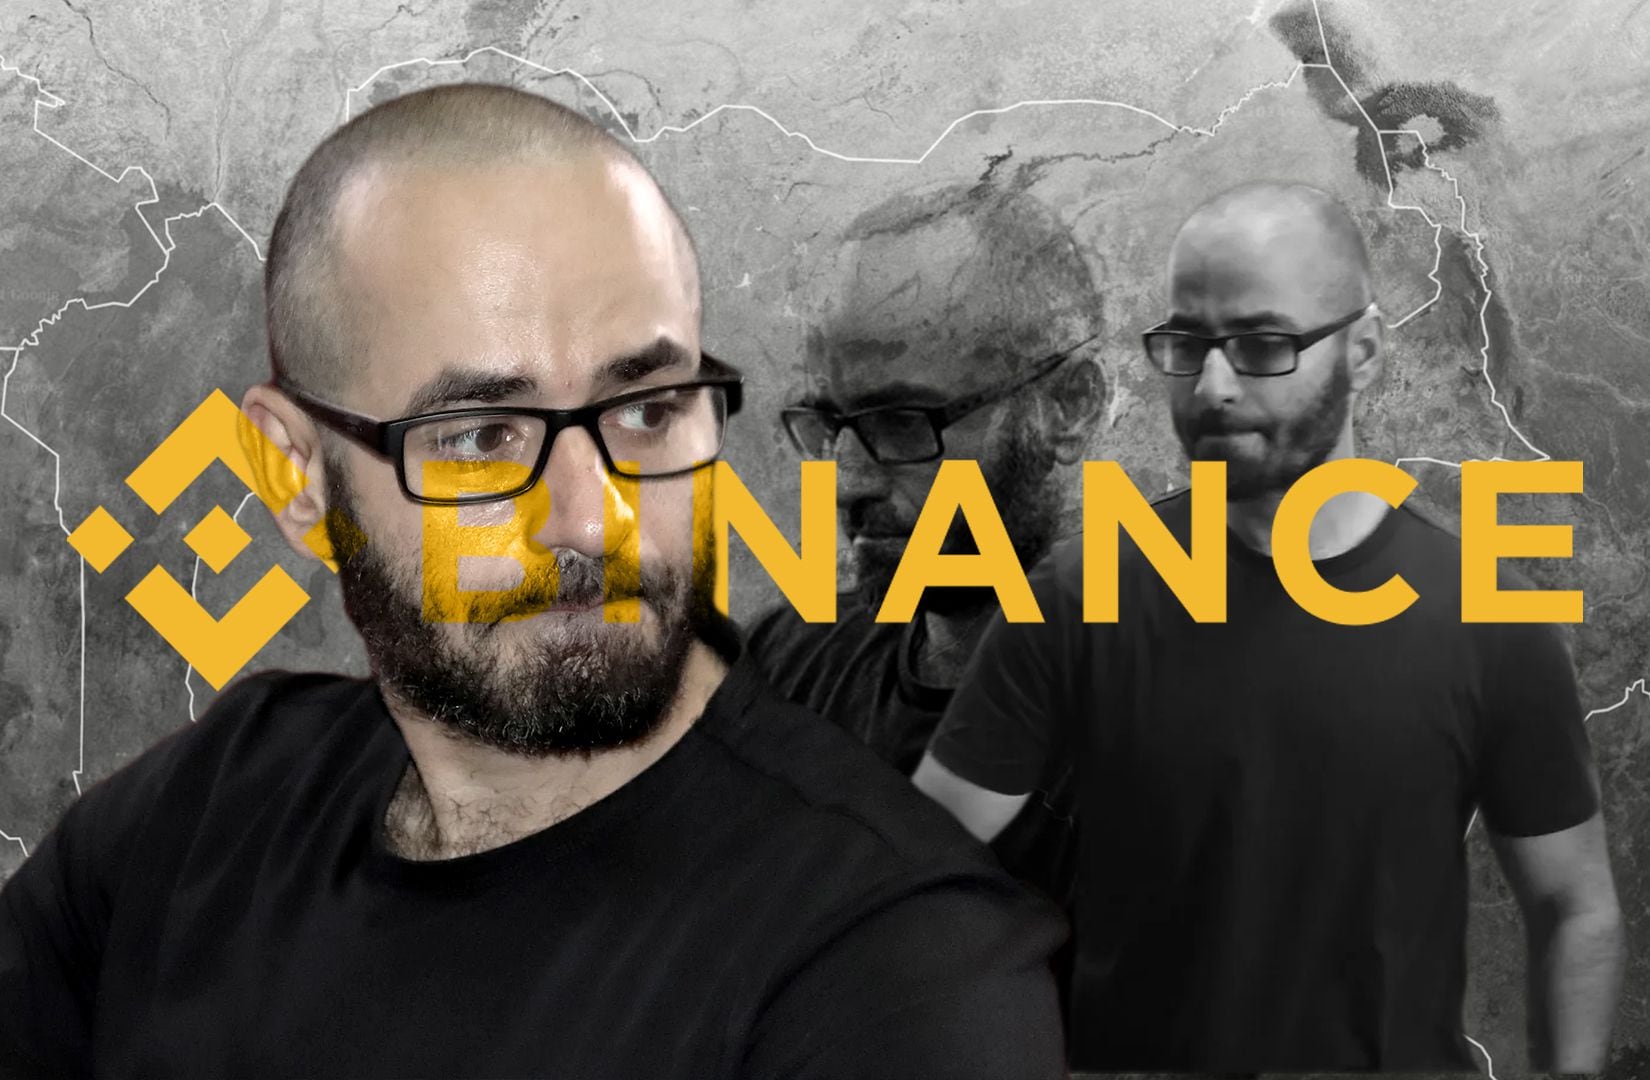 Binance exec’s trial in Nigeria is about to open: Here’s a timeline of the crypto crisis